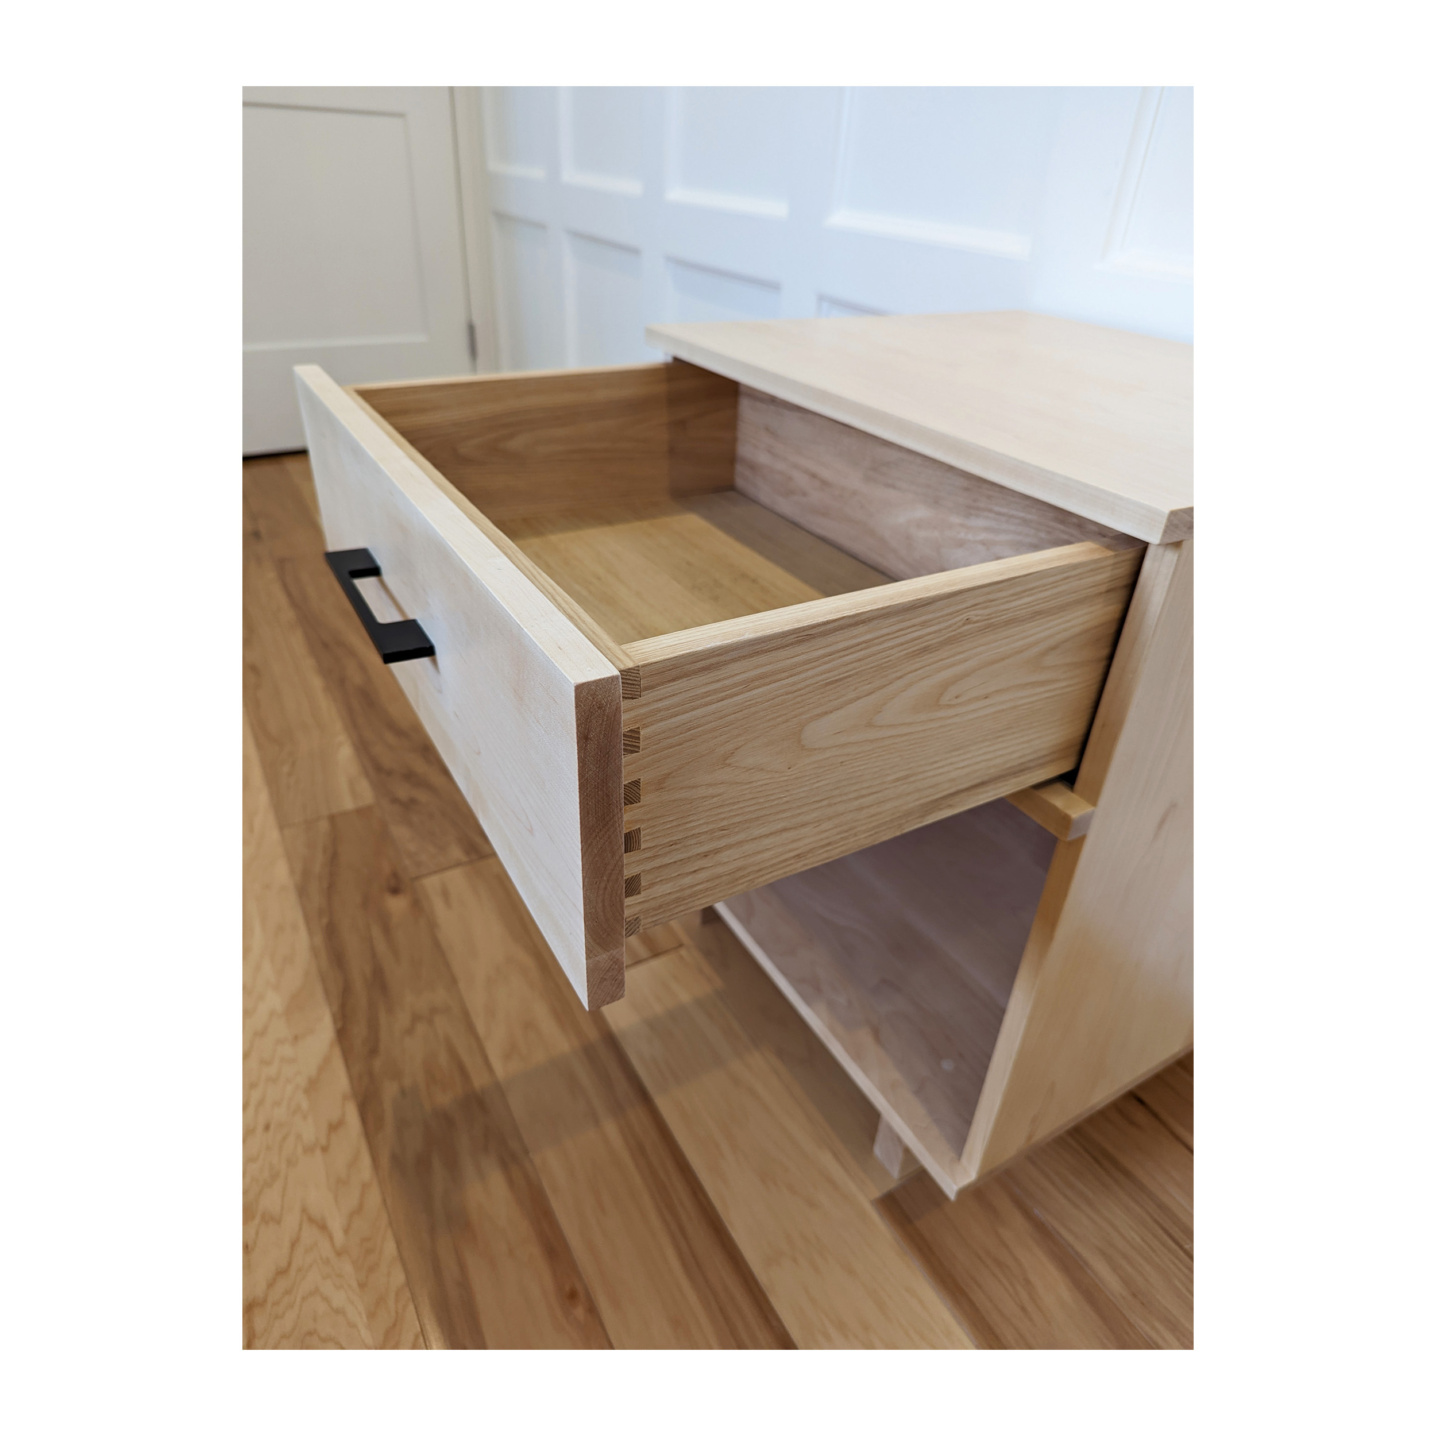 Dovetail Drawers on a Wood Nighstand--Made by 57NorthPlank Tailored Modern Furniture